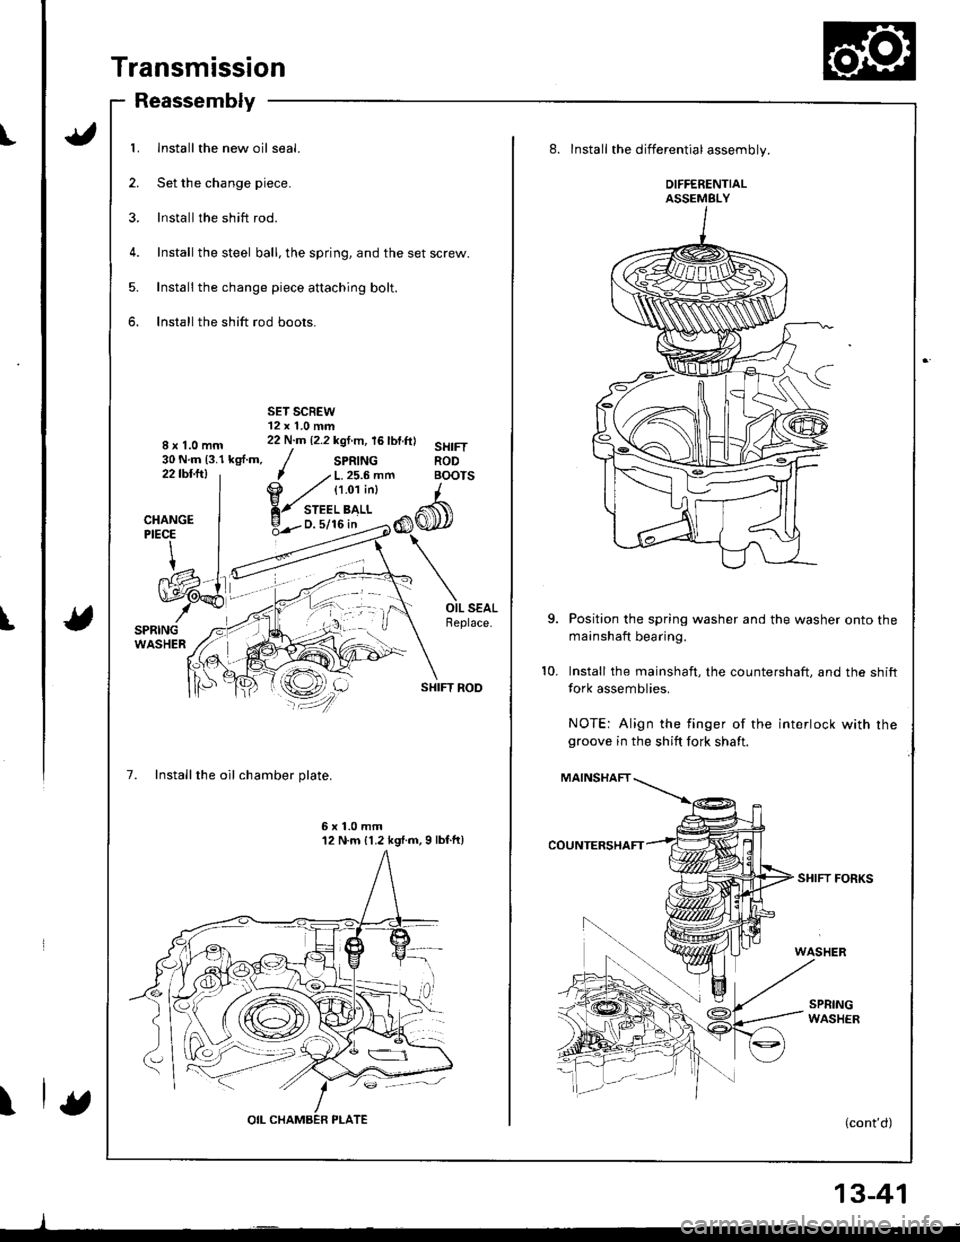 HONDA INTEGRA 1998 4.G Workshop Manual I
t
\
Transmission
Reassembly
1. Install the new oil seal.
2. Set the change piece.
3. lnstall the shift rod.
4. Install the steel ball, the spring, and the set screw.
5. Install the change piece atta